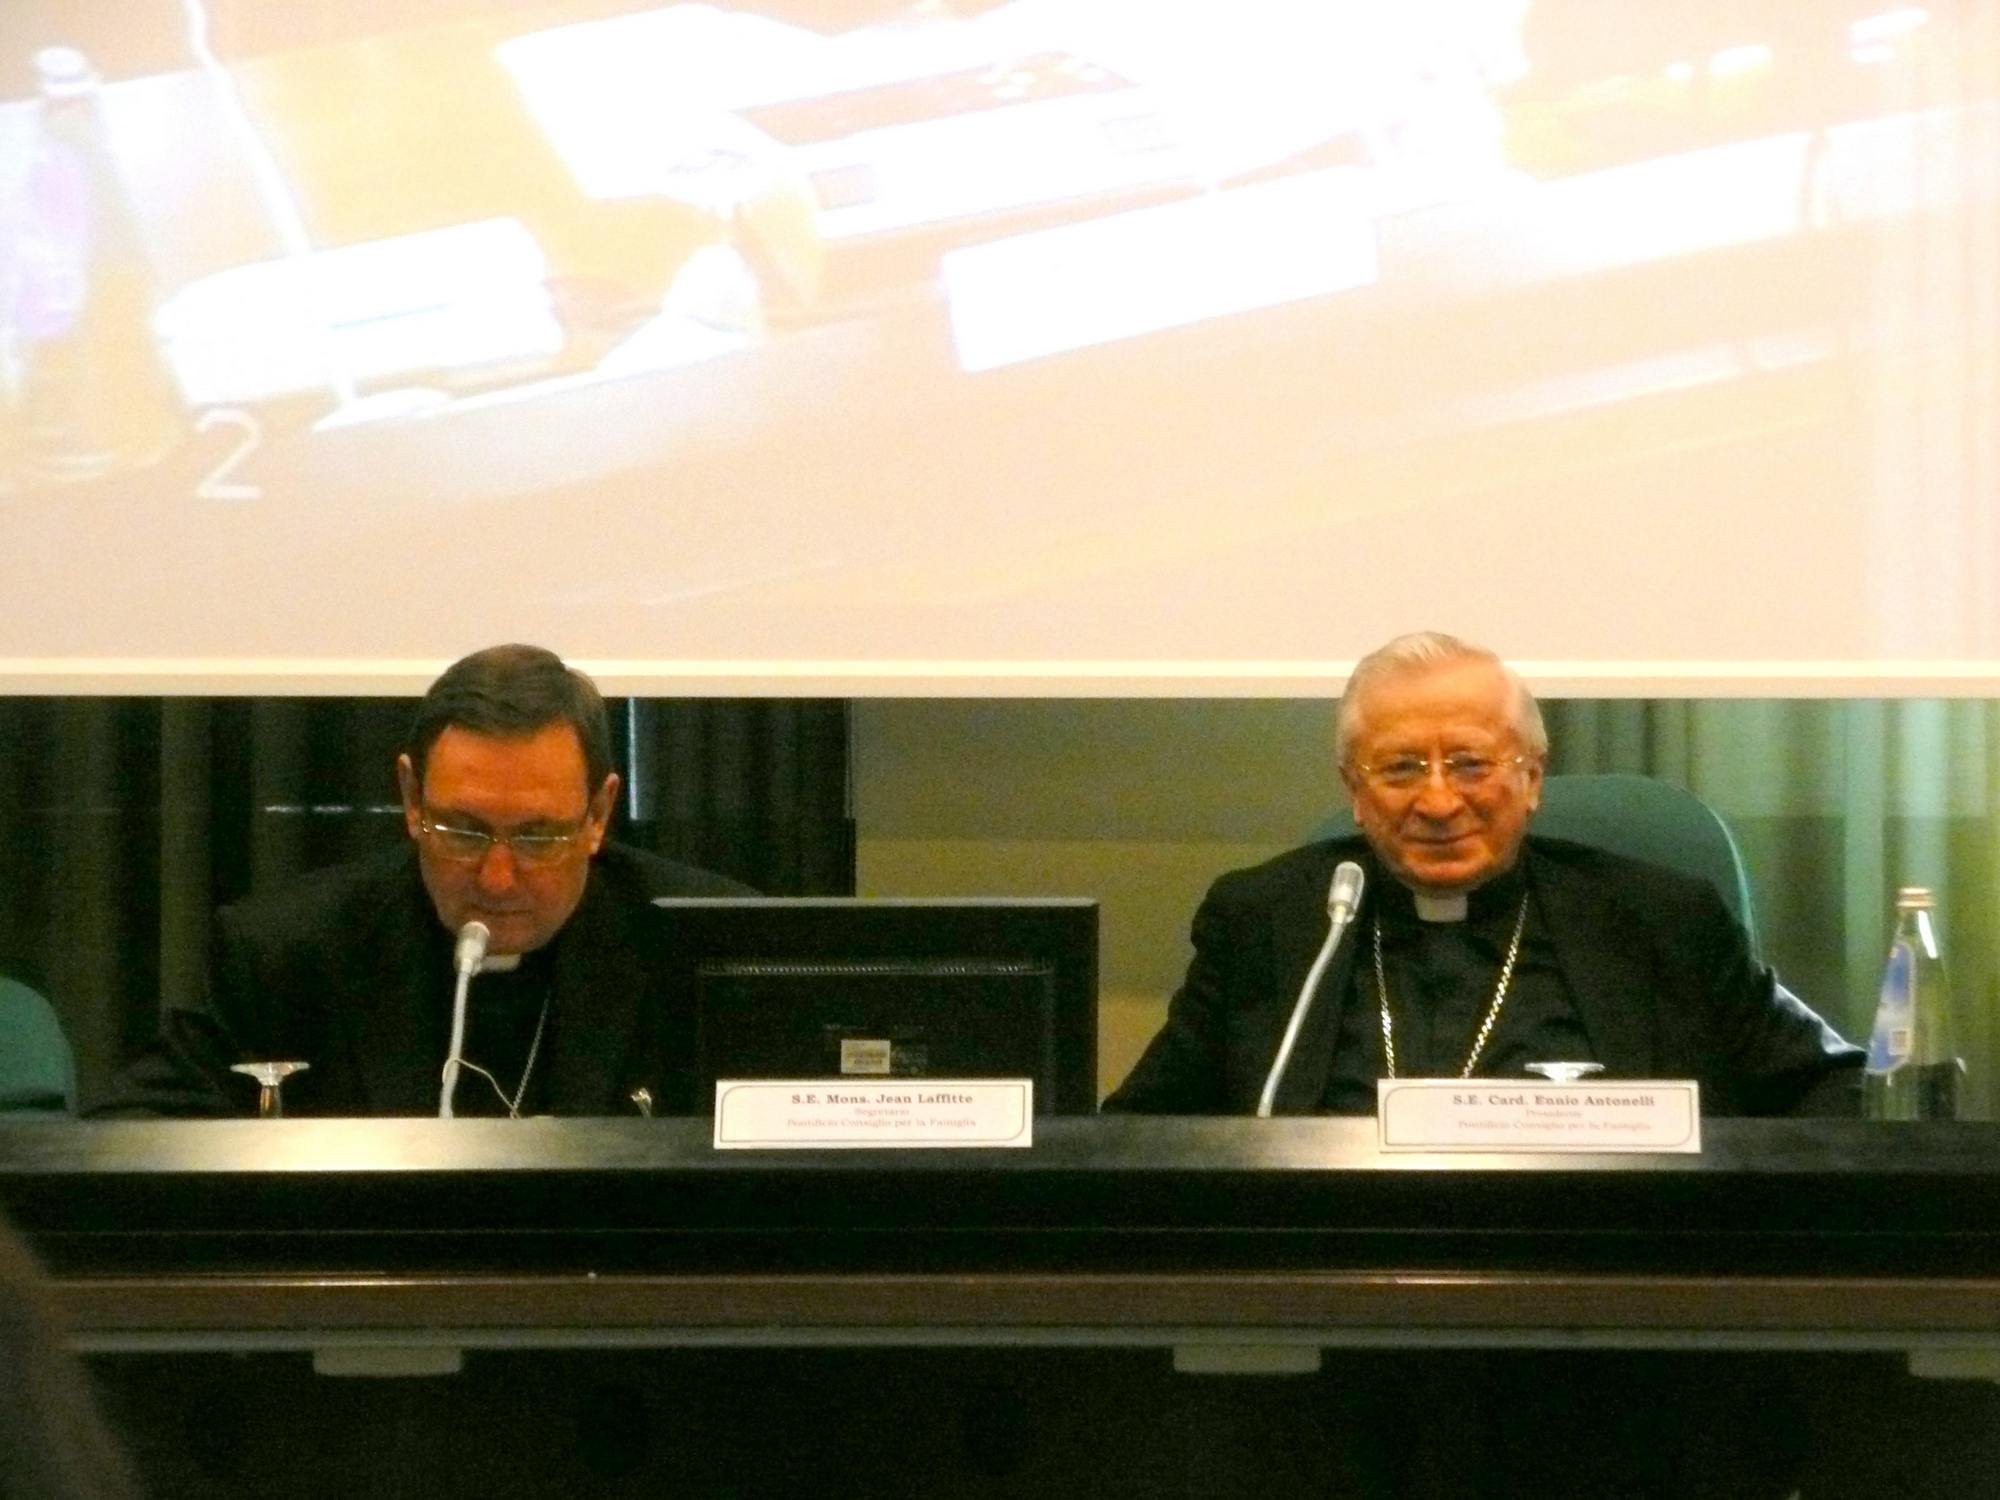 Monseigneur Jean Laffite and Cardinal Antonelli during the presentation made by Jean Laffite 2010